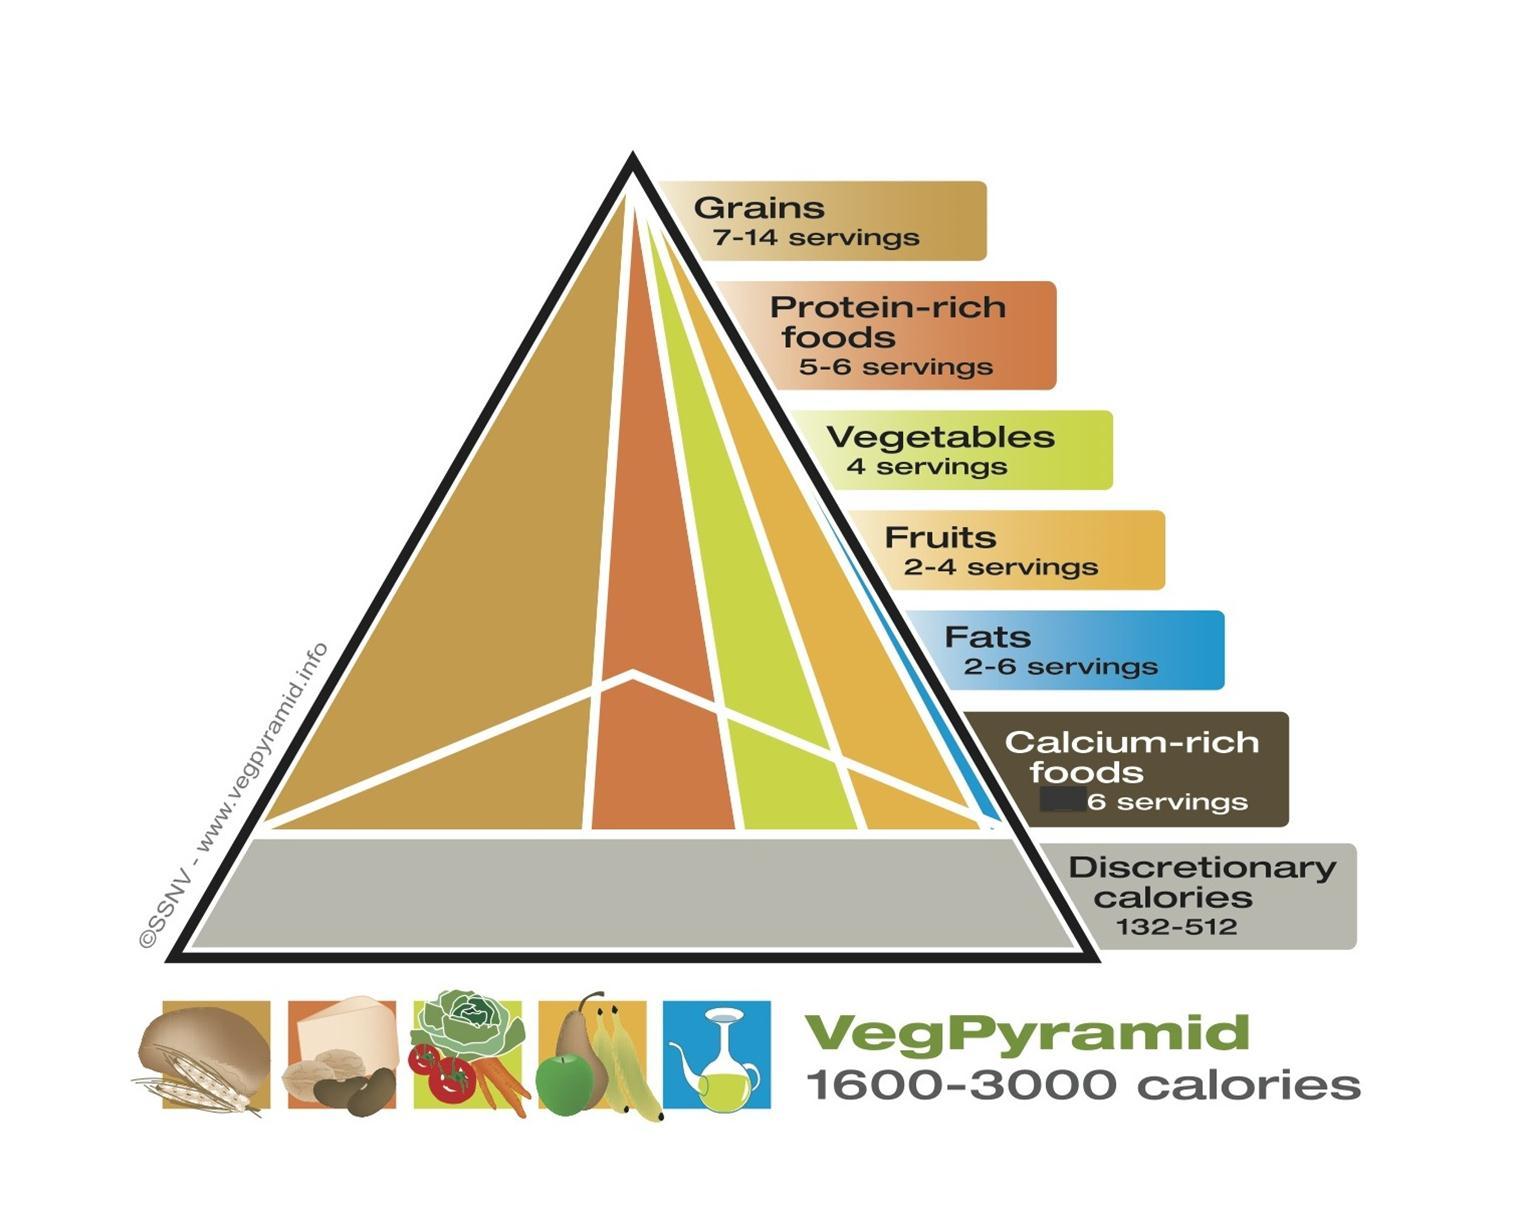  VegPyramid. Available at: http://www.vegpyramid.info (Accessed Aug 14, 2014; reproduced with permission)